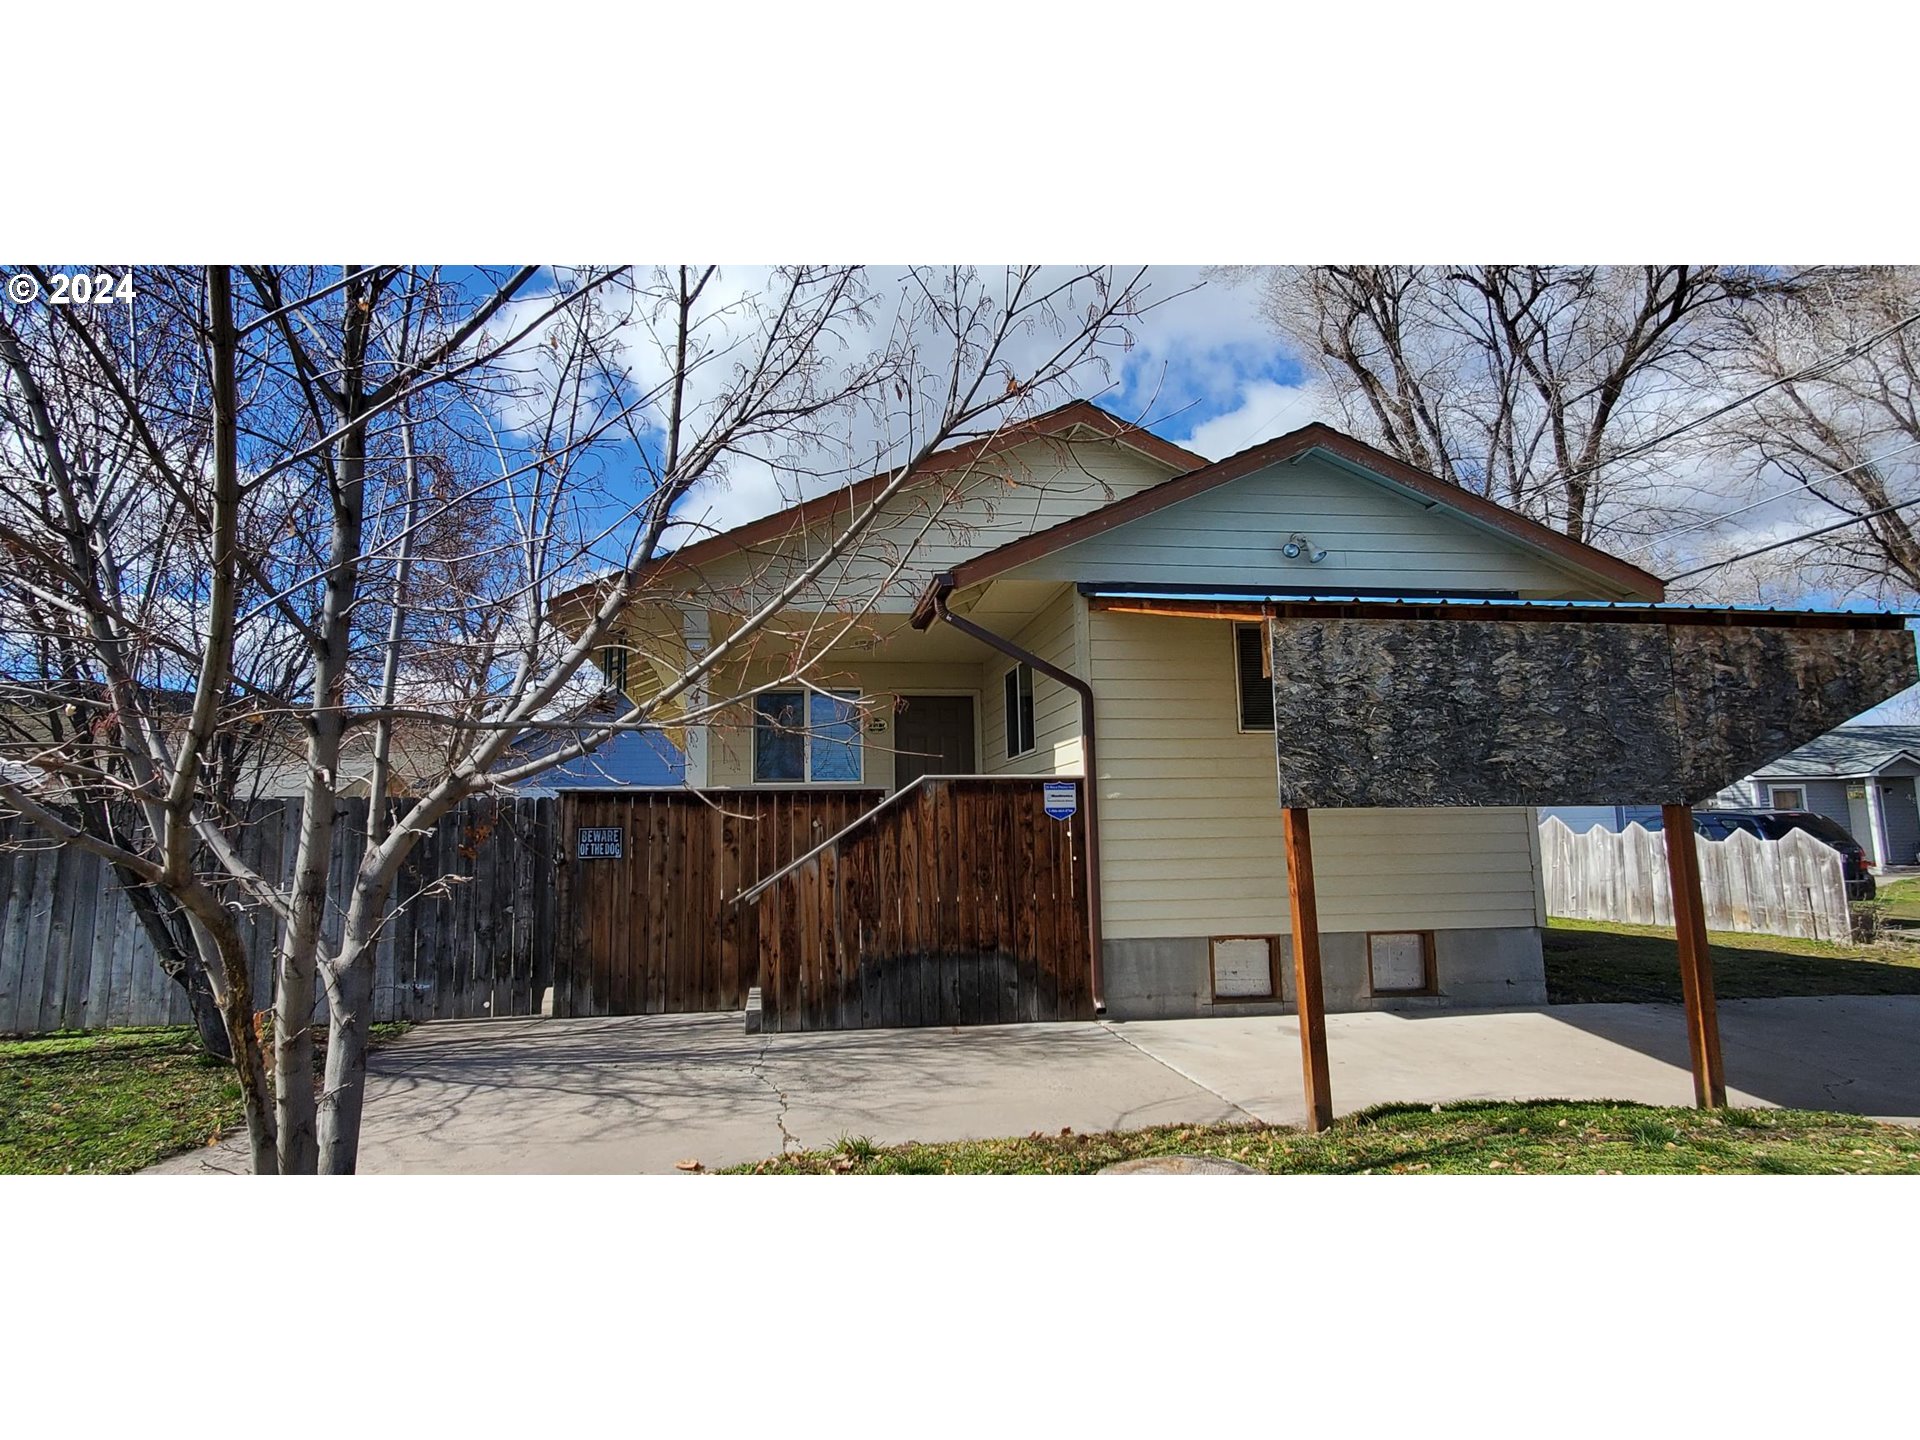 447 NW HARWOOD ST, Prineville, OR 97754